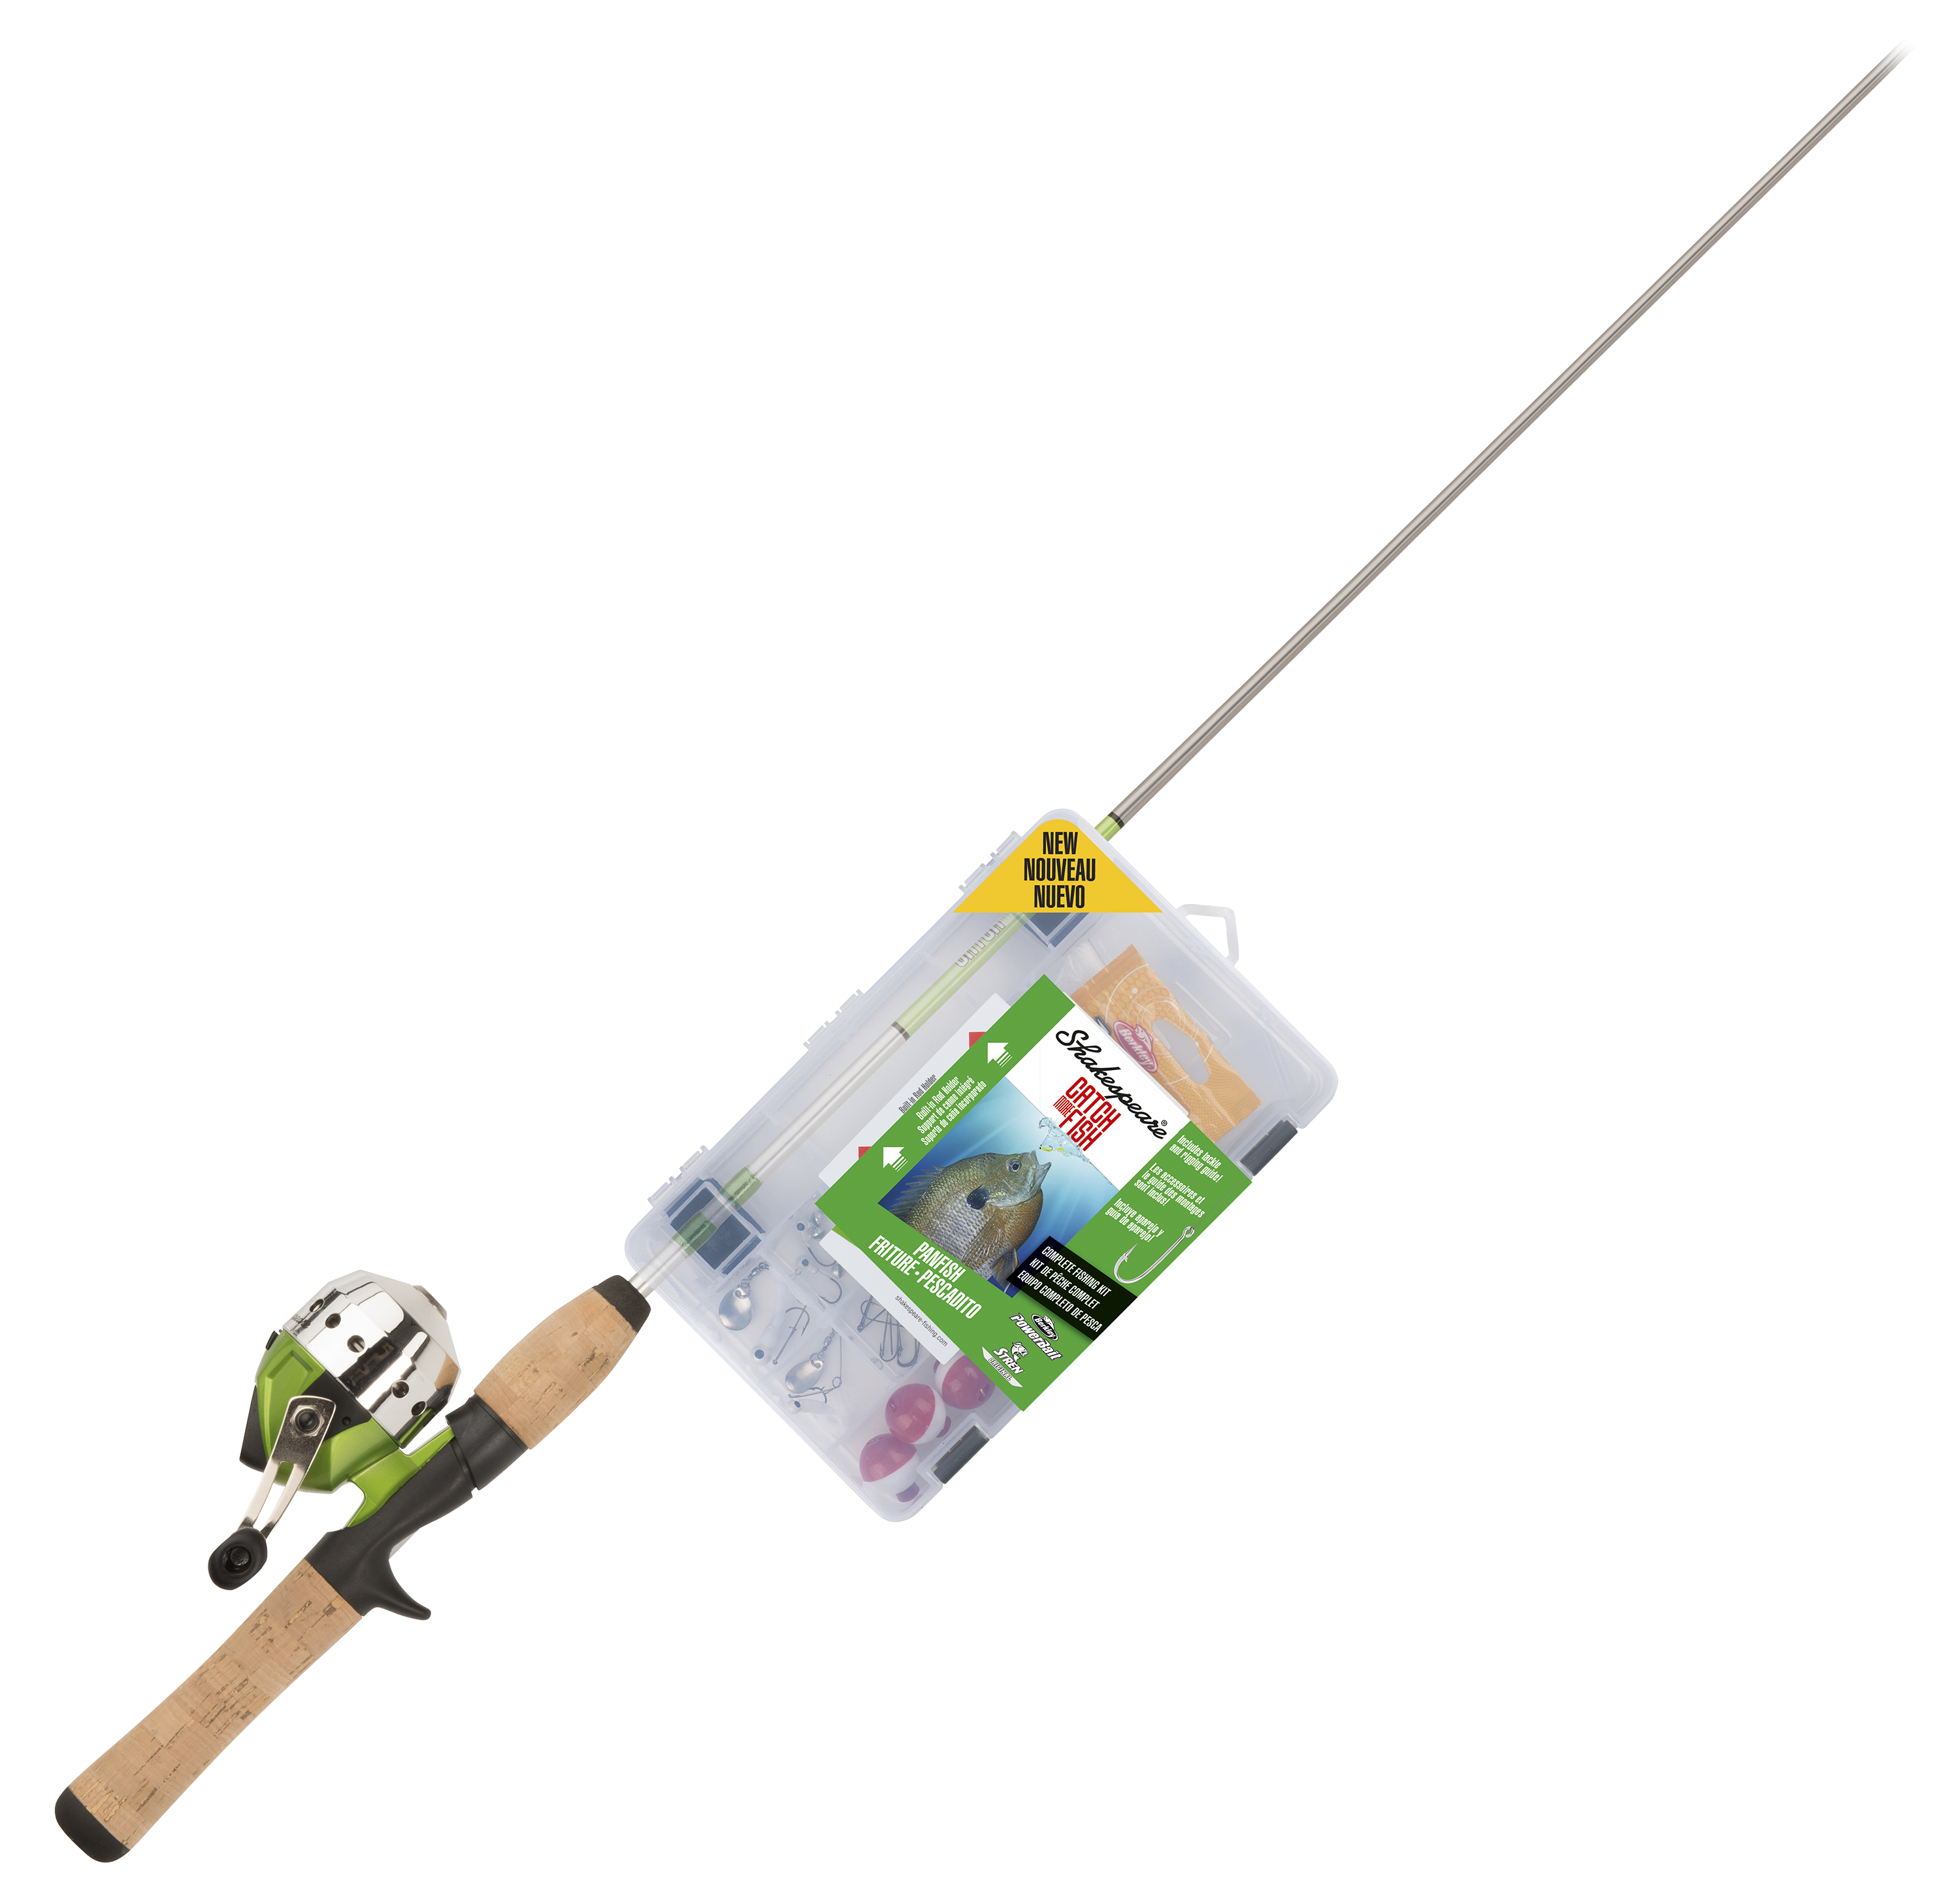 Shakespeare Catch More Fish Spincast Rod and Reel Combo for Panfish